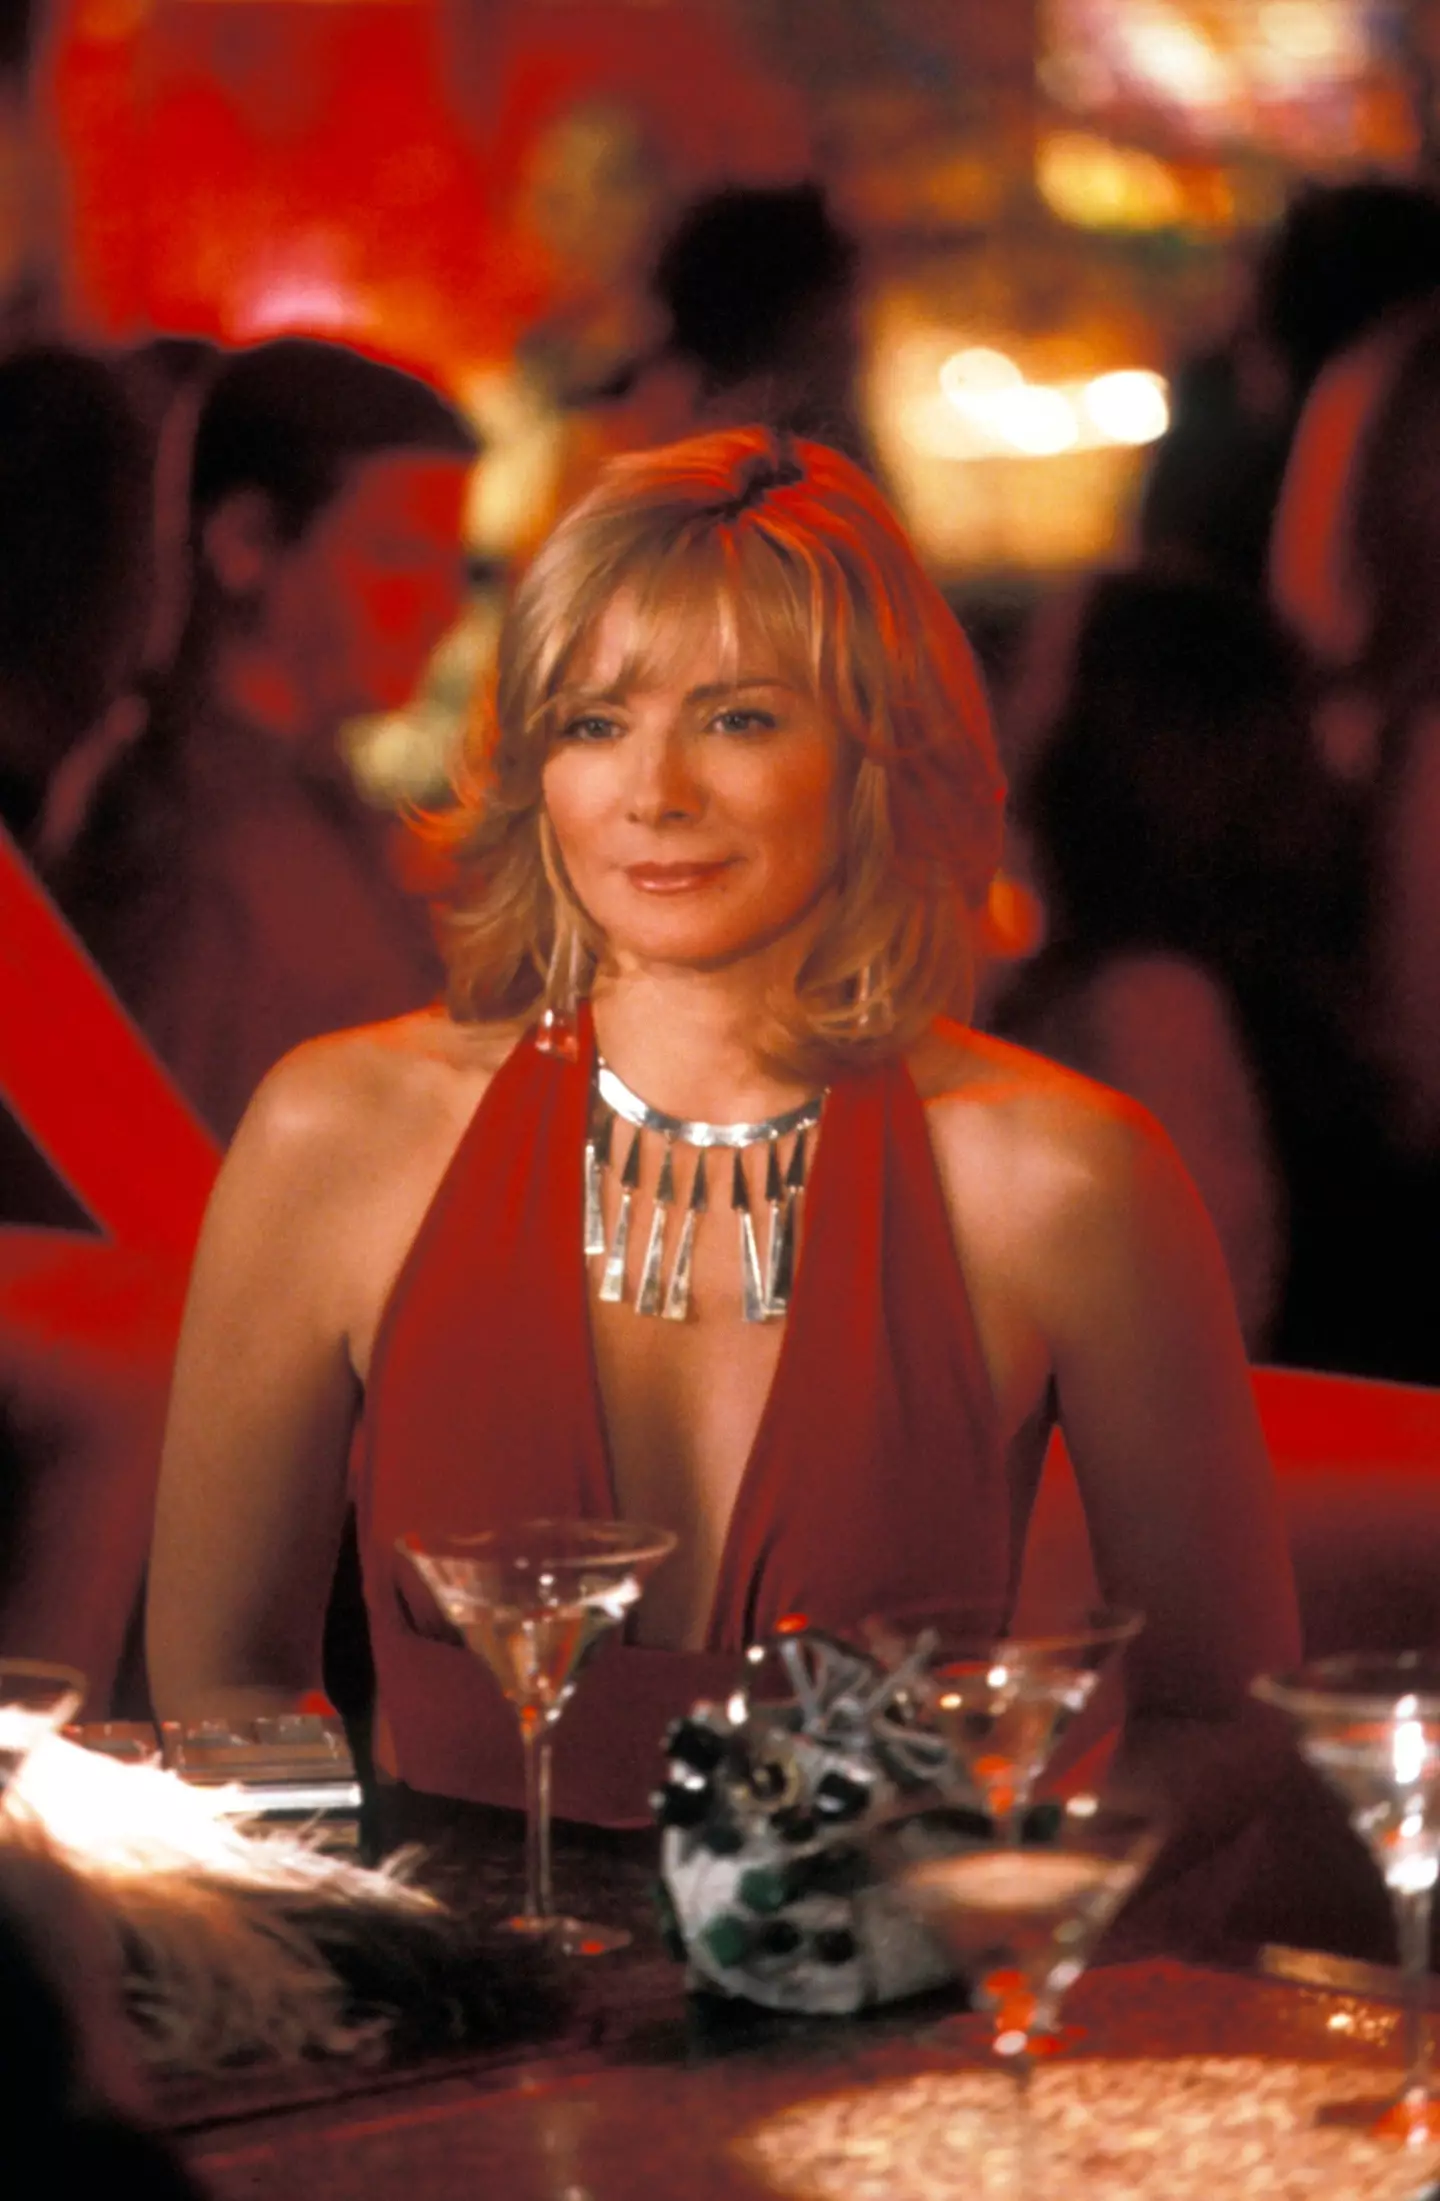 KIm Cattrall quit her role as Samantha (